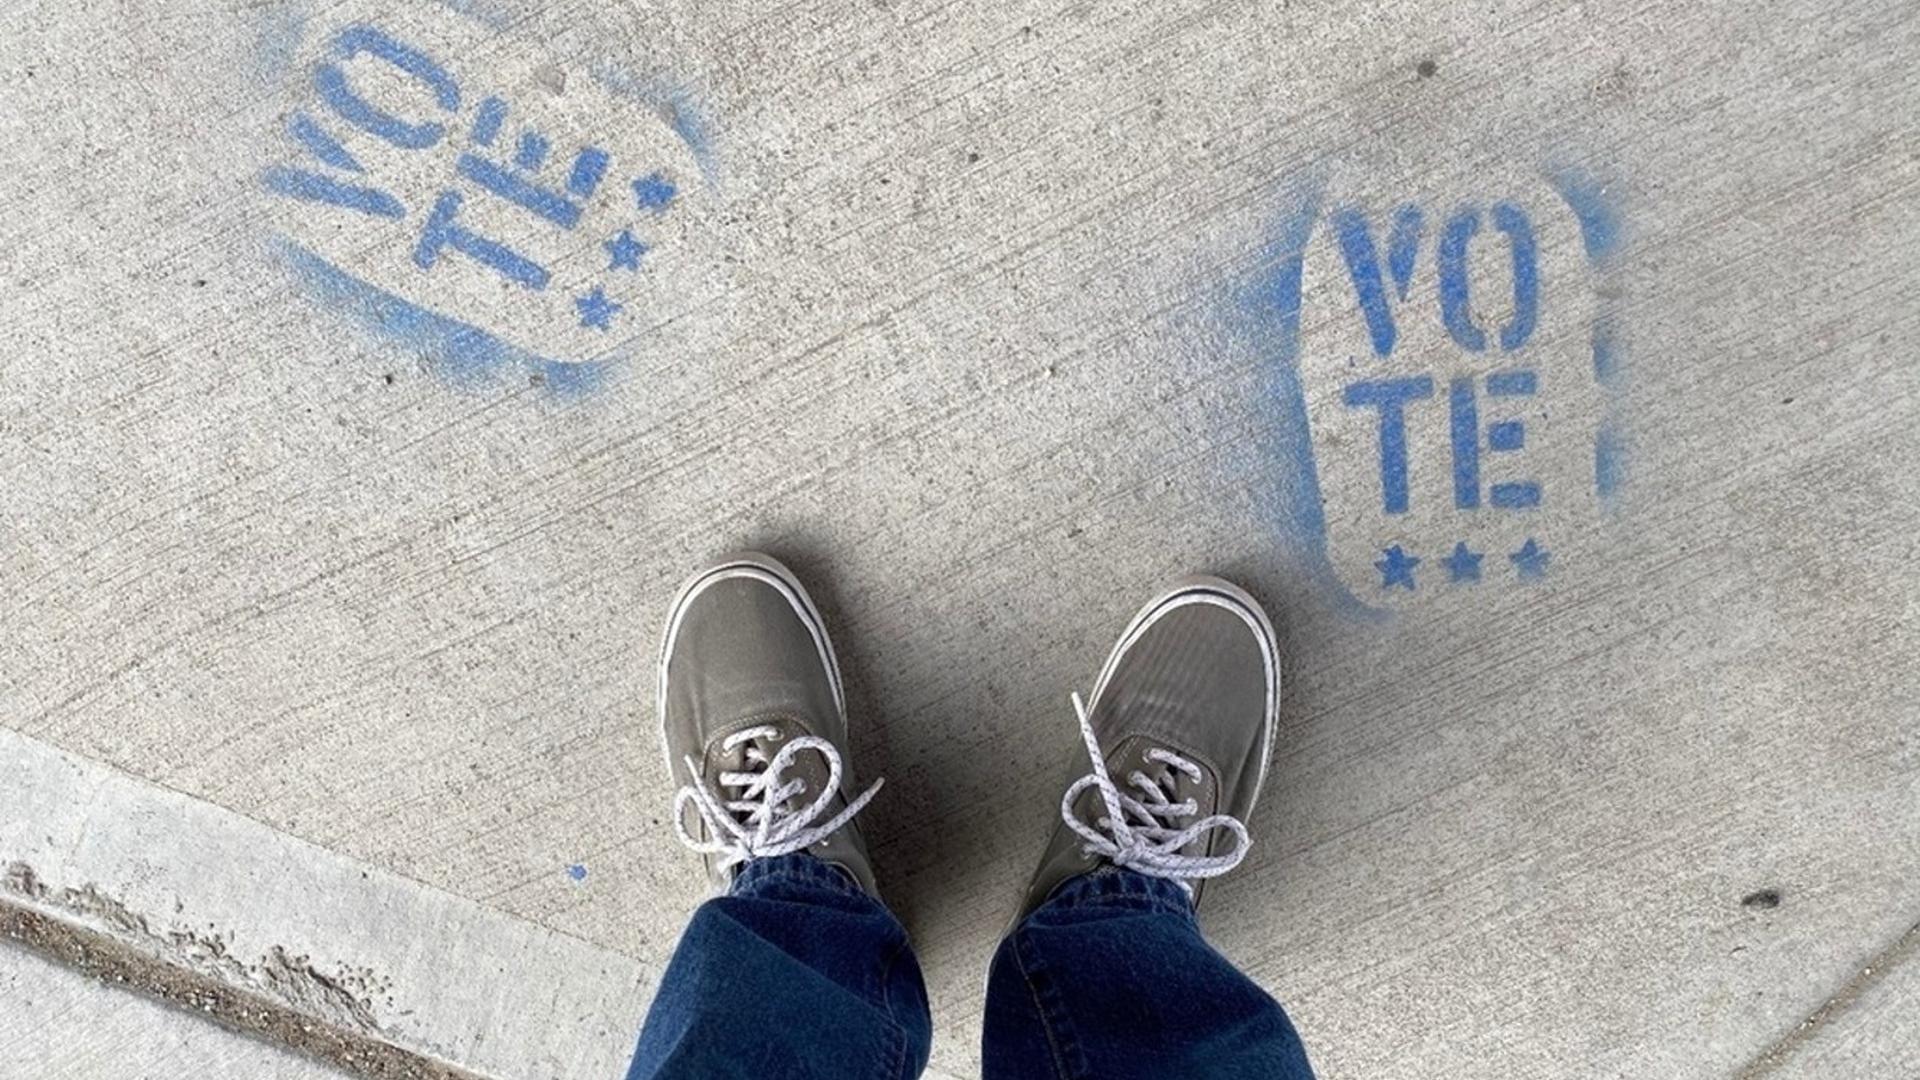 Person in jeans and grey sneakers standing on sidewalk that has been painted with the word "Vote"